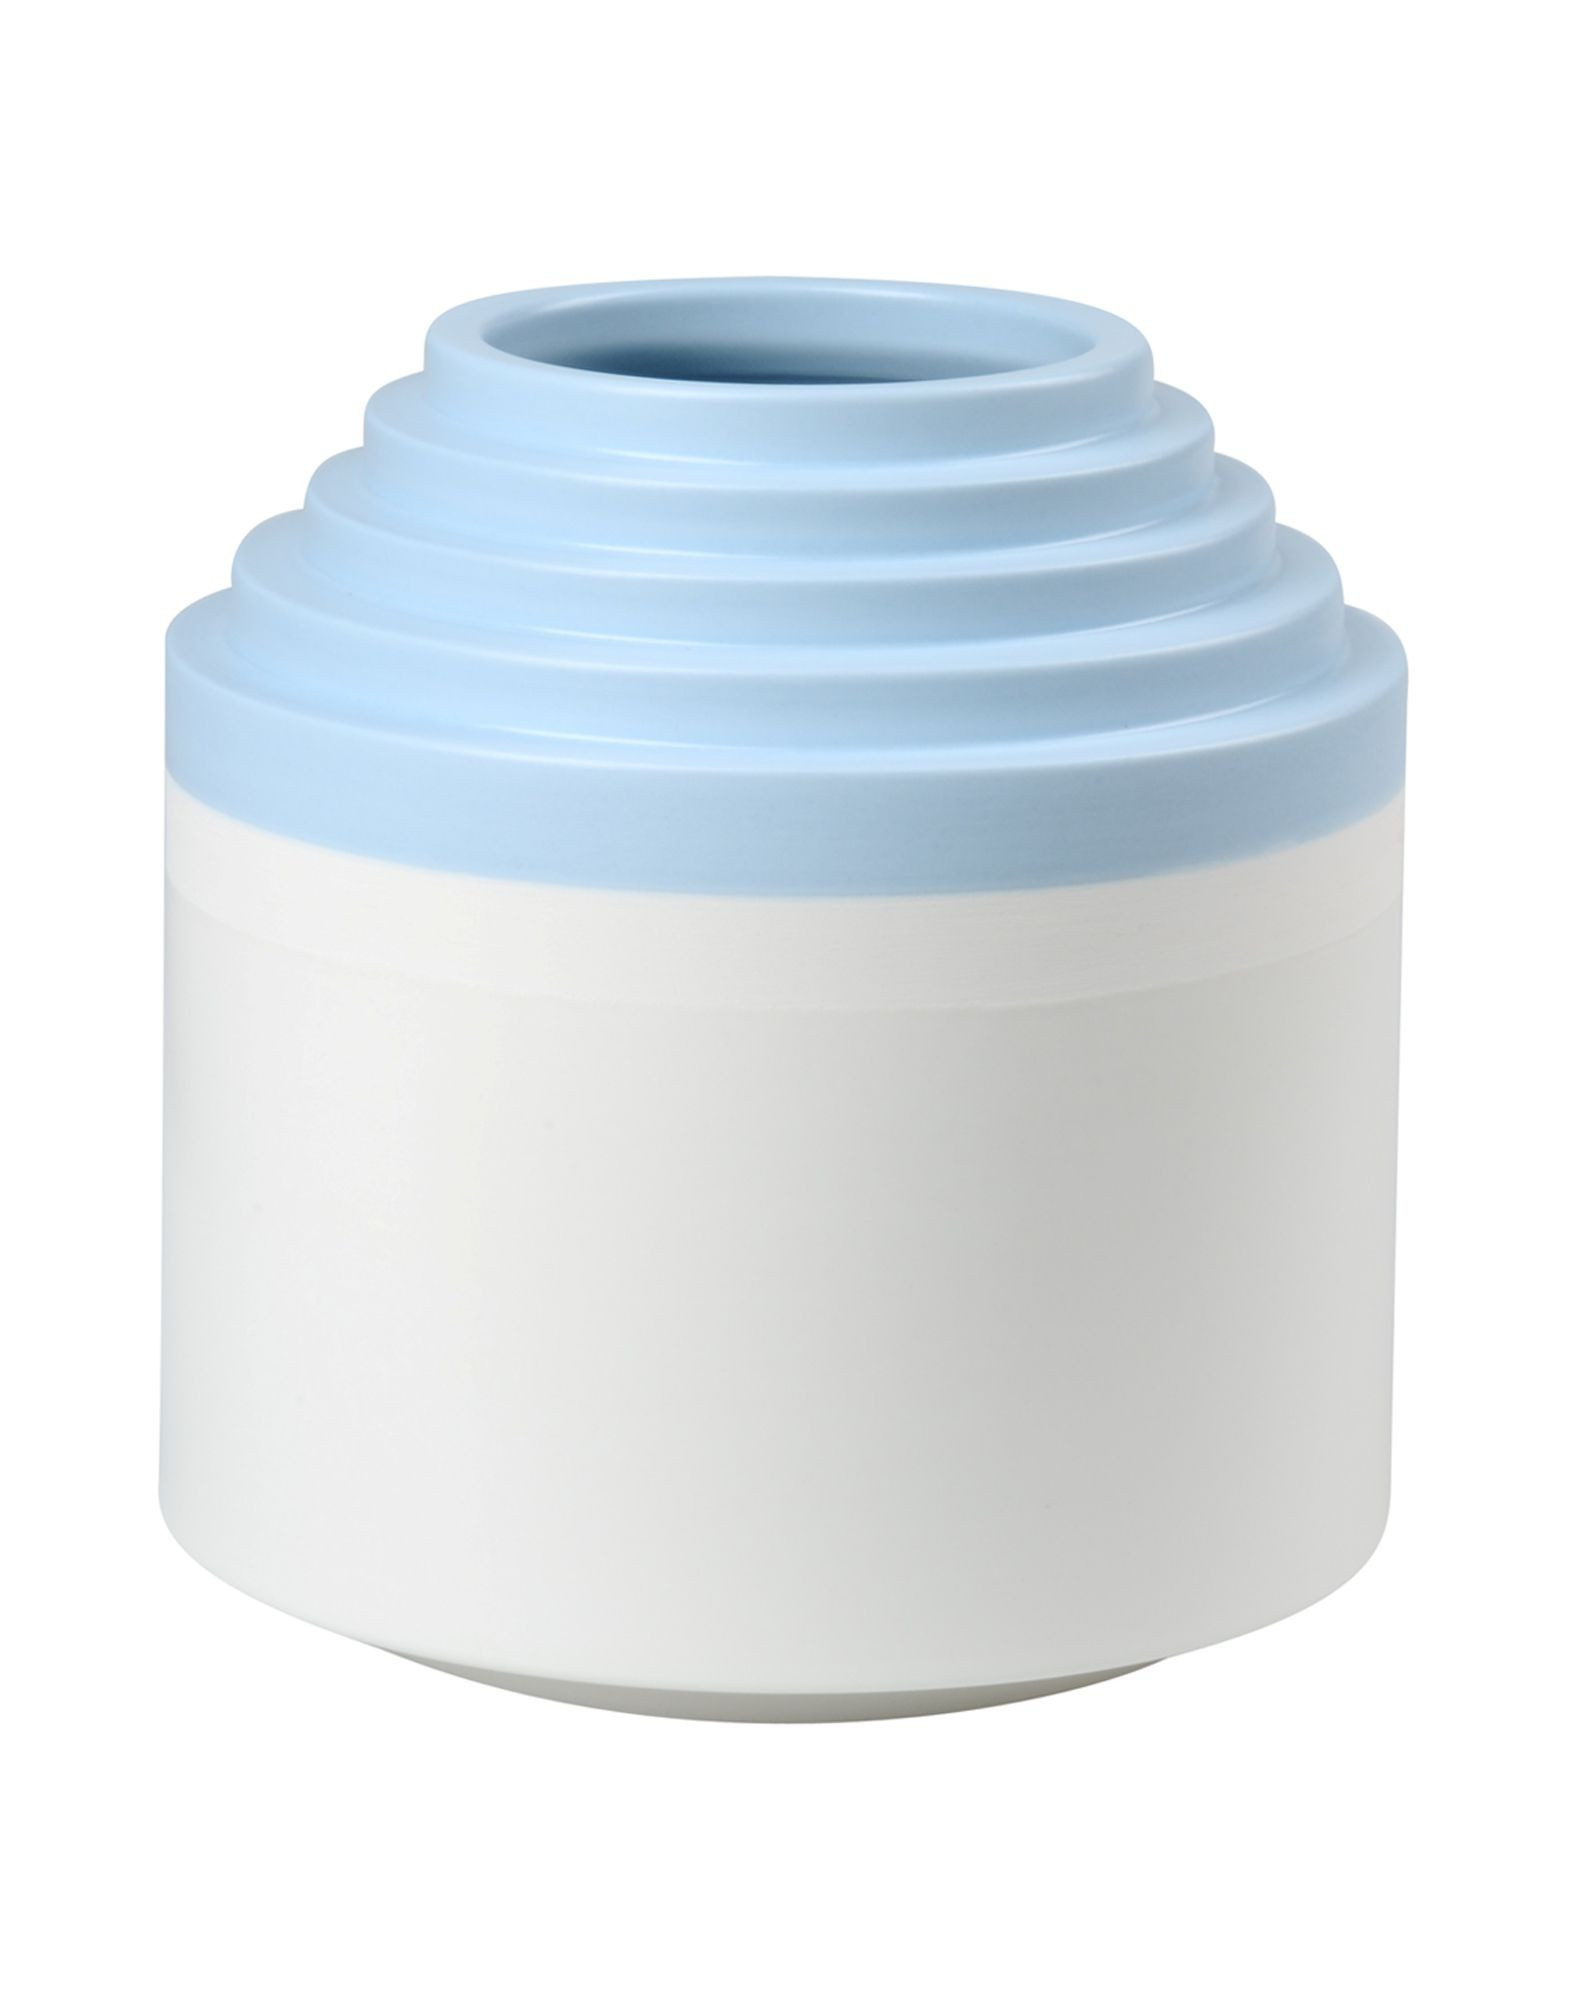 14 Ideal Ettore sottsass Vase 2023 free download ettore sottsass vase of vase no 542 h24x22 blue white for vase no 542 h24x22 blue white